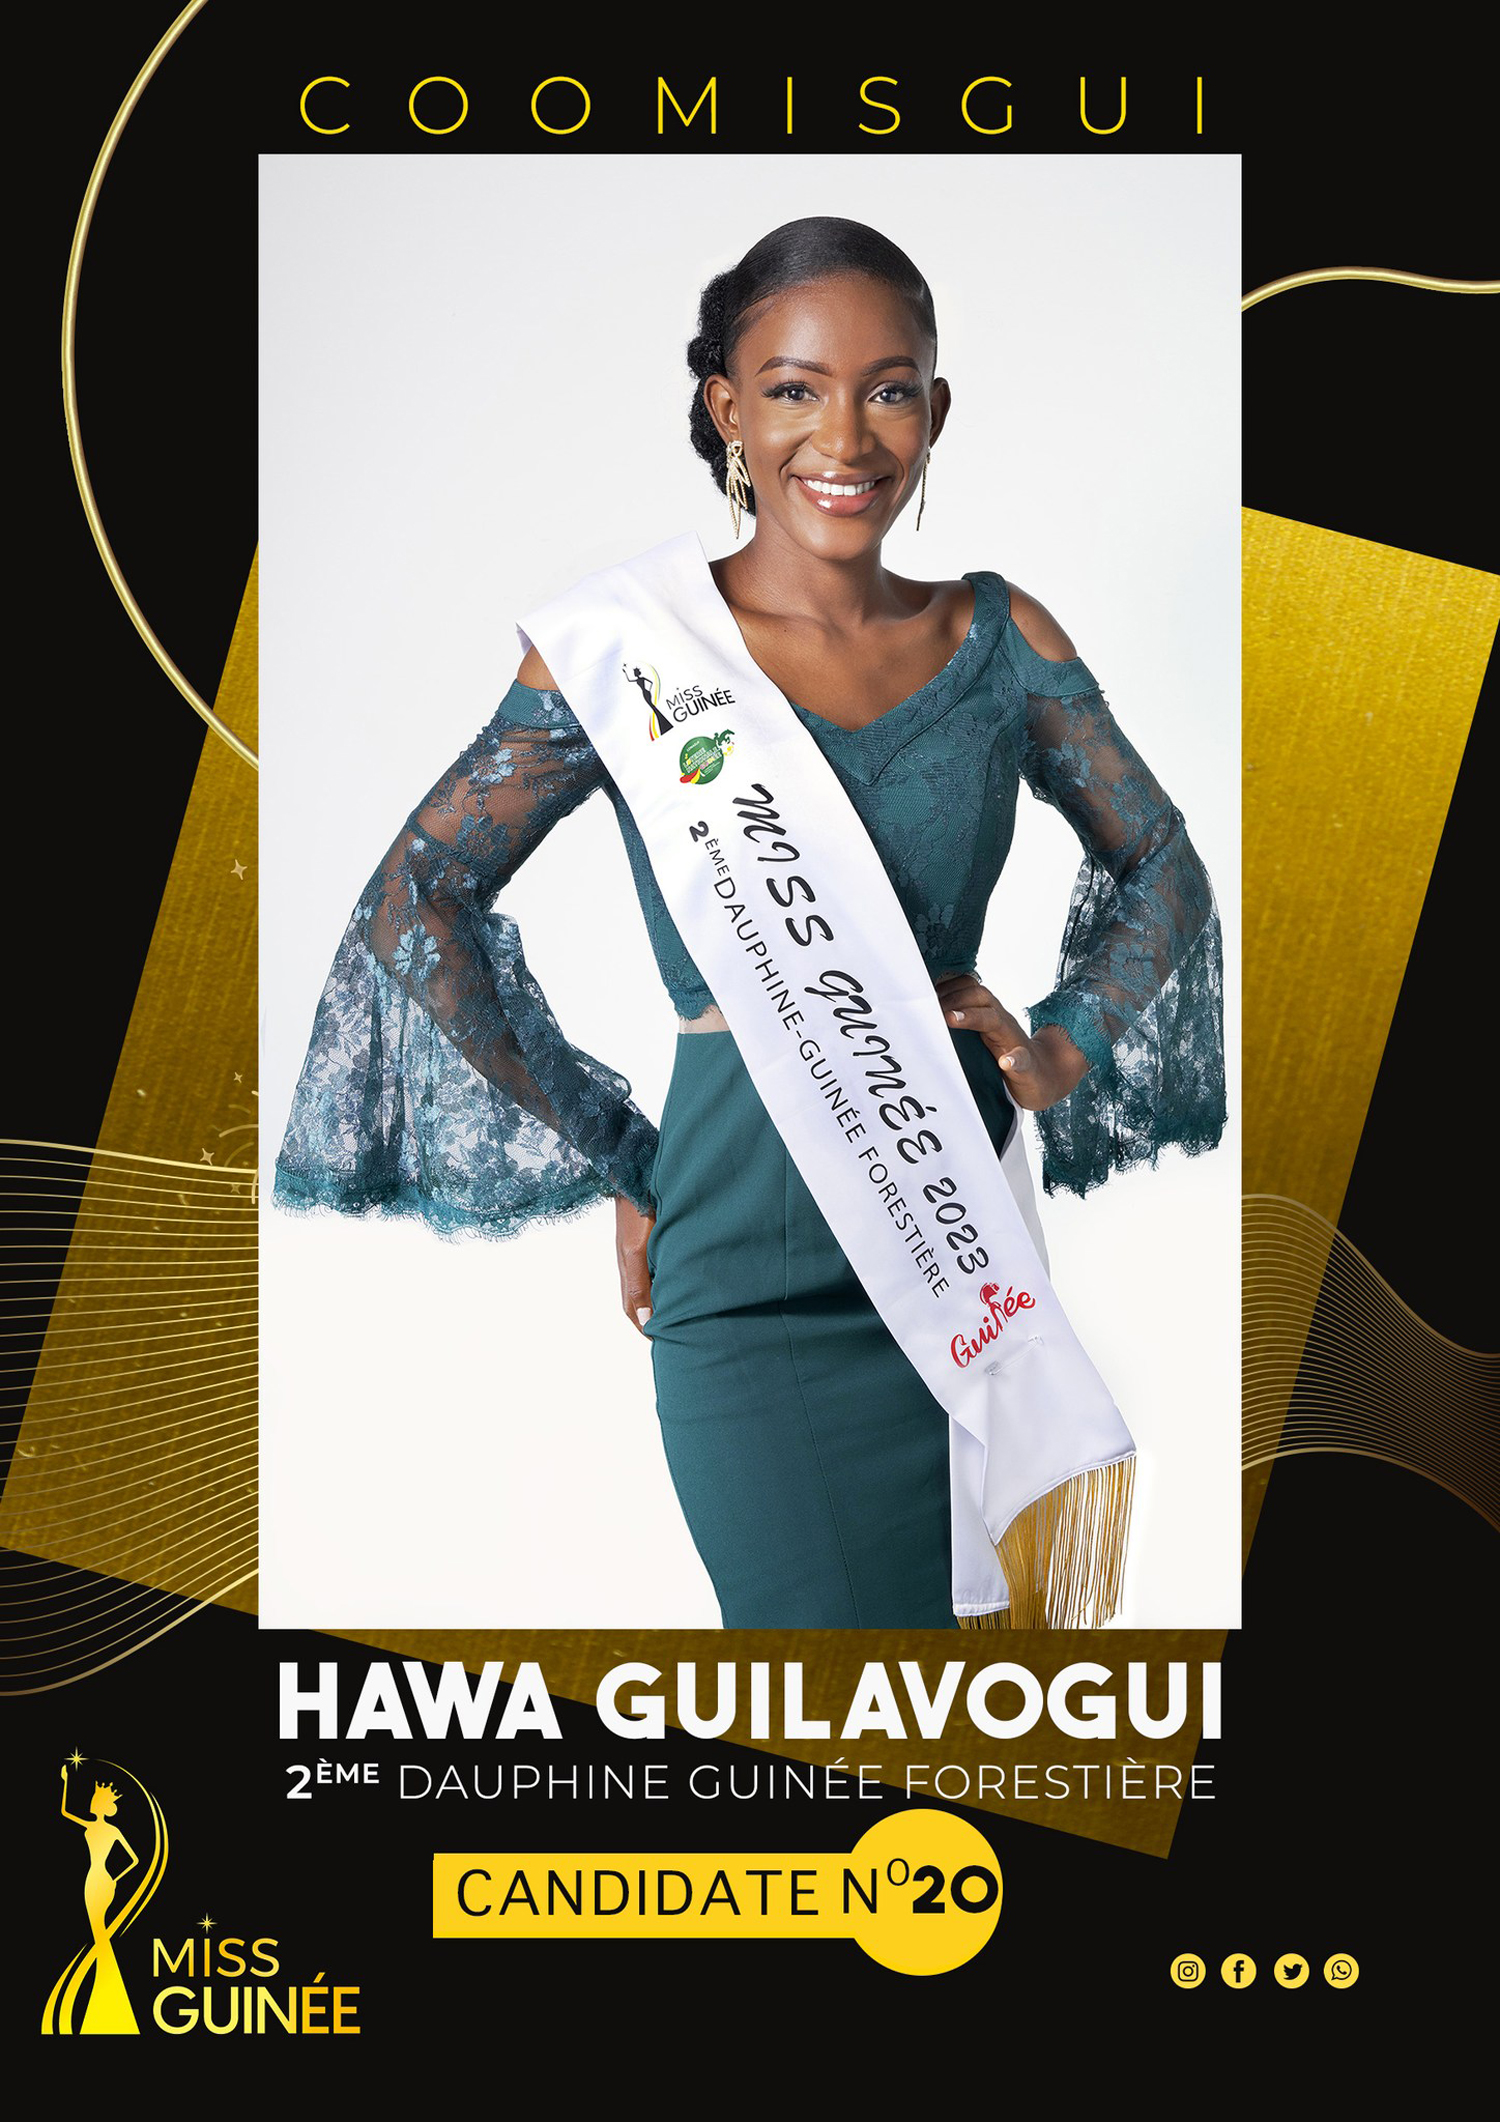 The Comity of COOMISGUI - Mrs AMINATA DIALLO  presents the Finalist of MISS GUINEE 2023 - Miss-HAWA GUILAVOGUI representing the-Second Runner of Miss Guinee FORESTIERE - CANDIDATE Number-20 - DN-AFRICA Media Partner